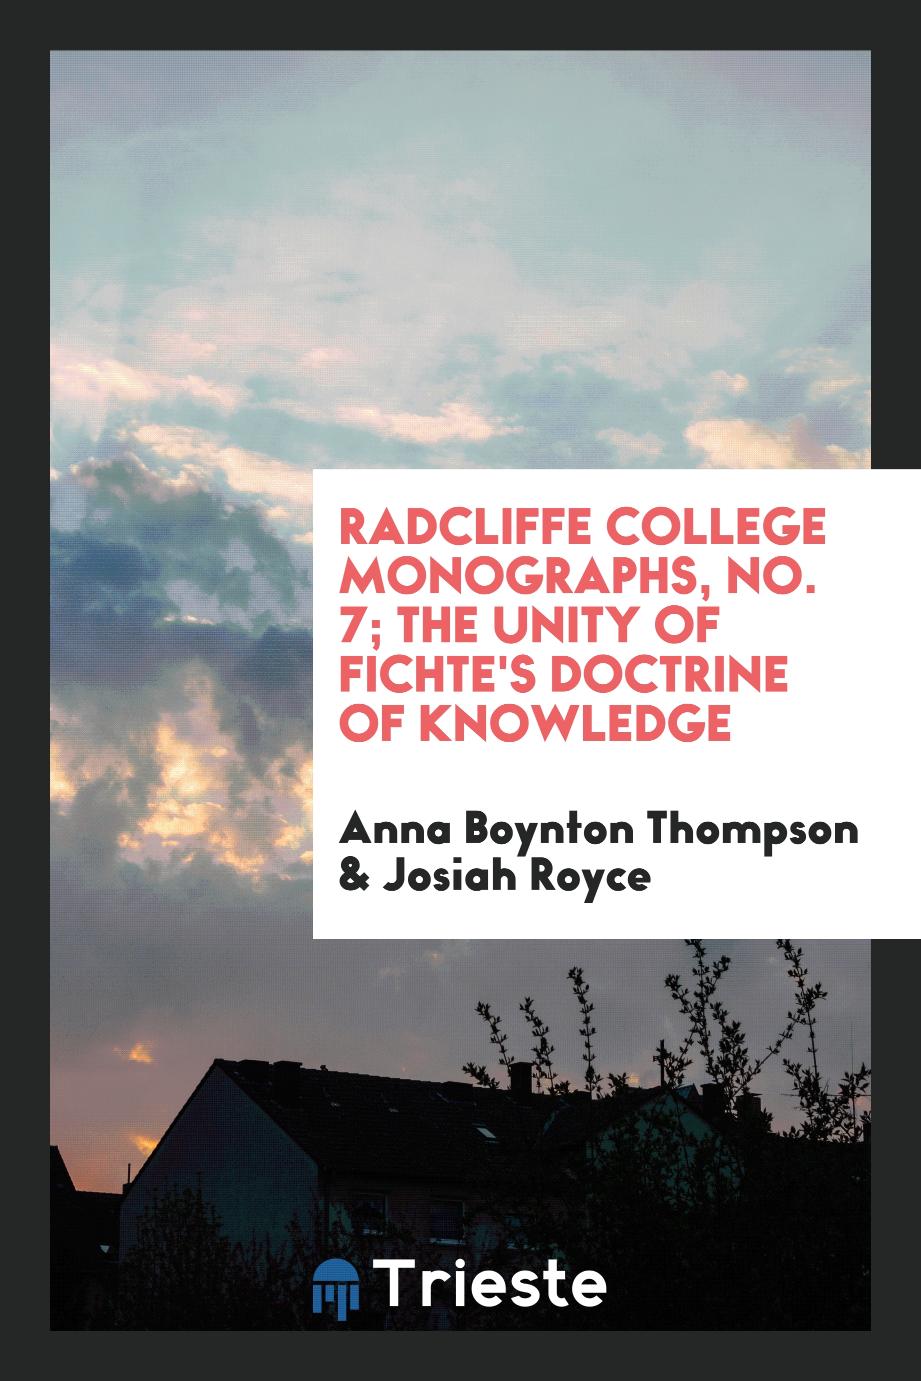 Radcliffe College Monographs, No. 7; The Unity of Fichte's Doctrine of Knowledge